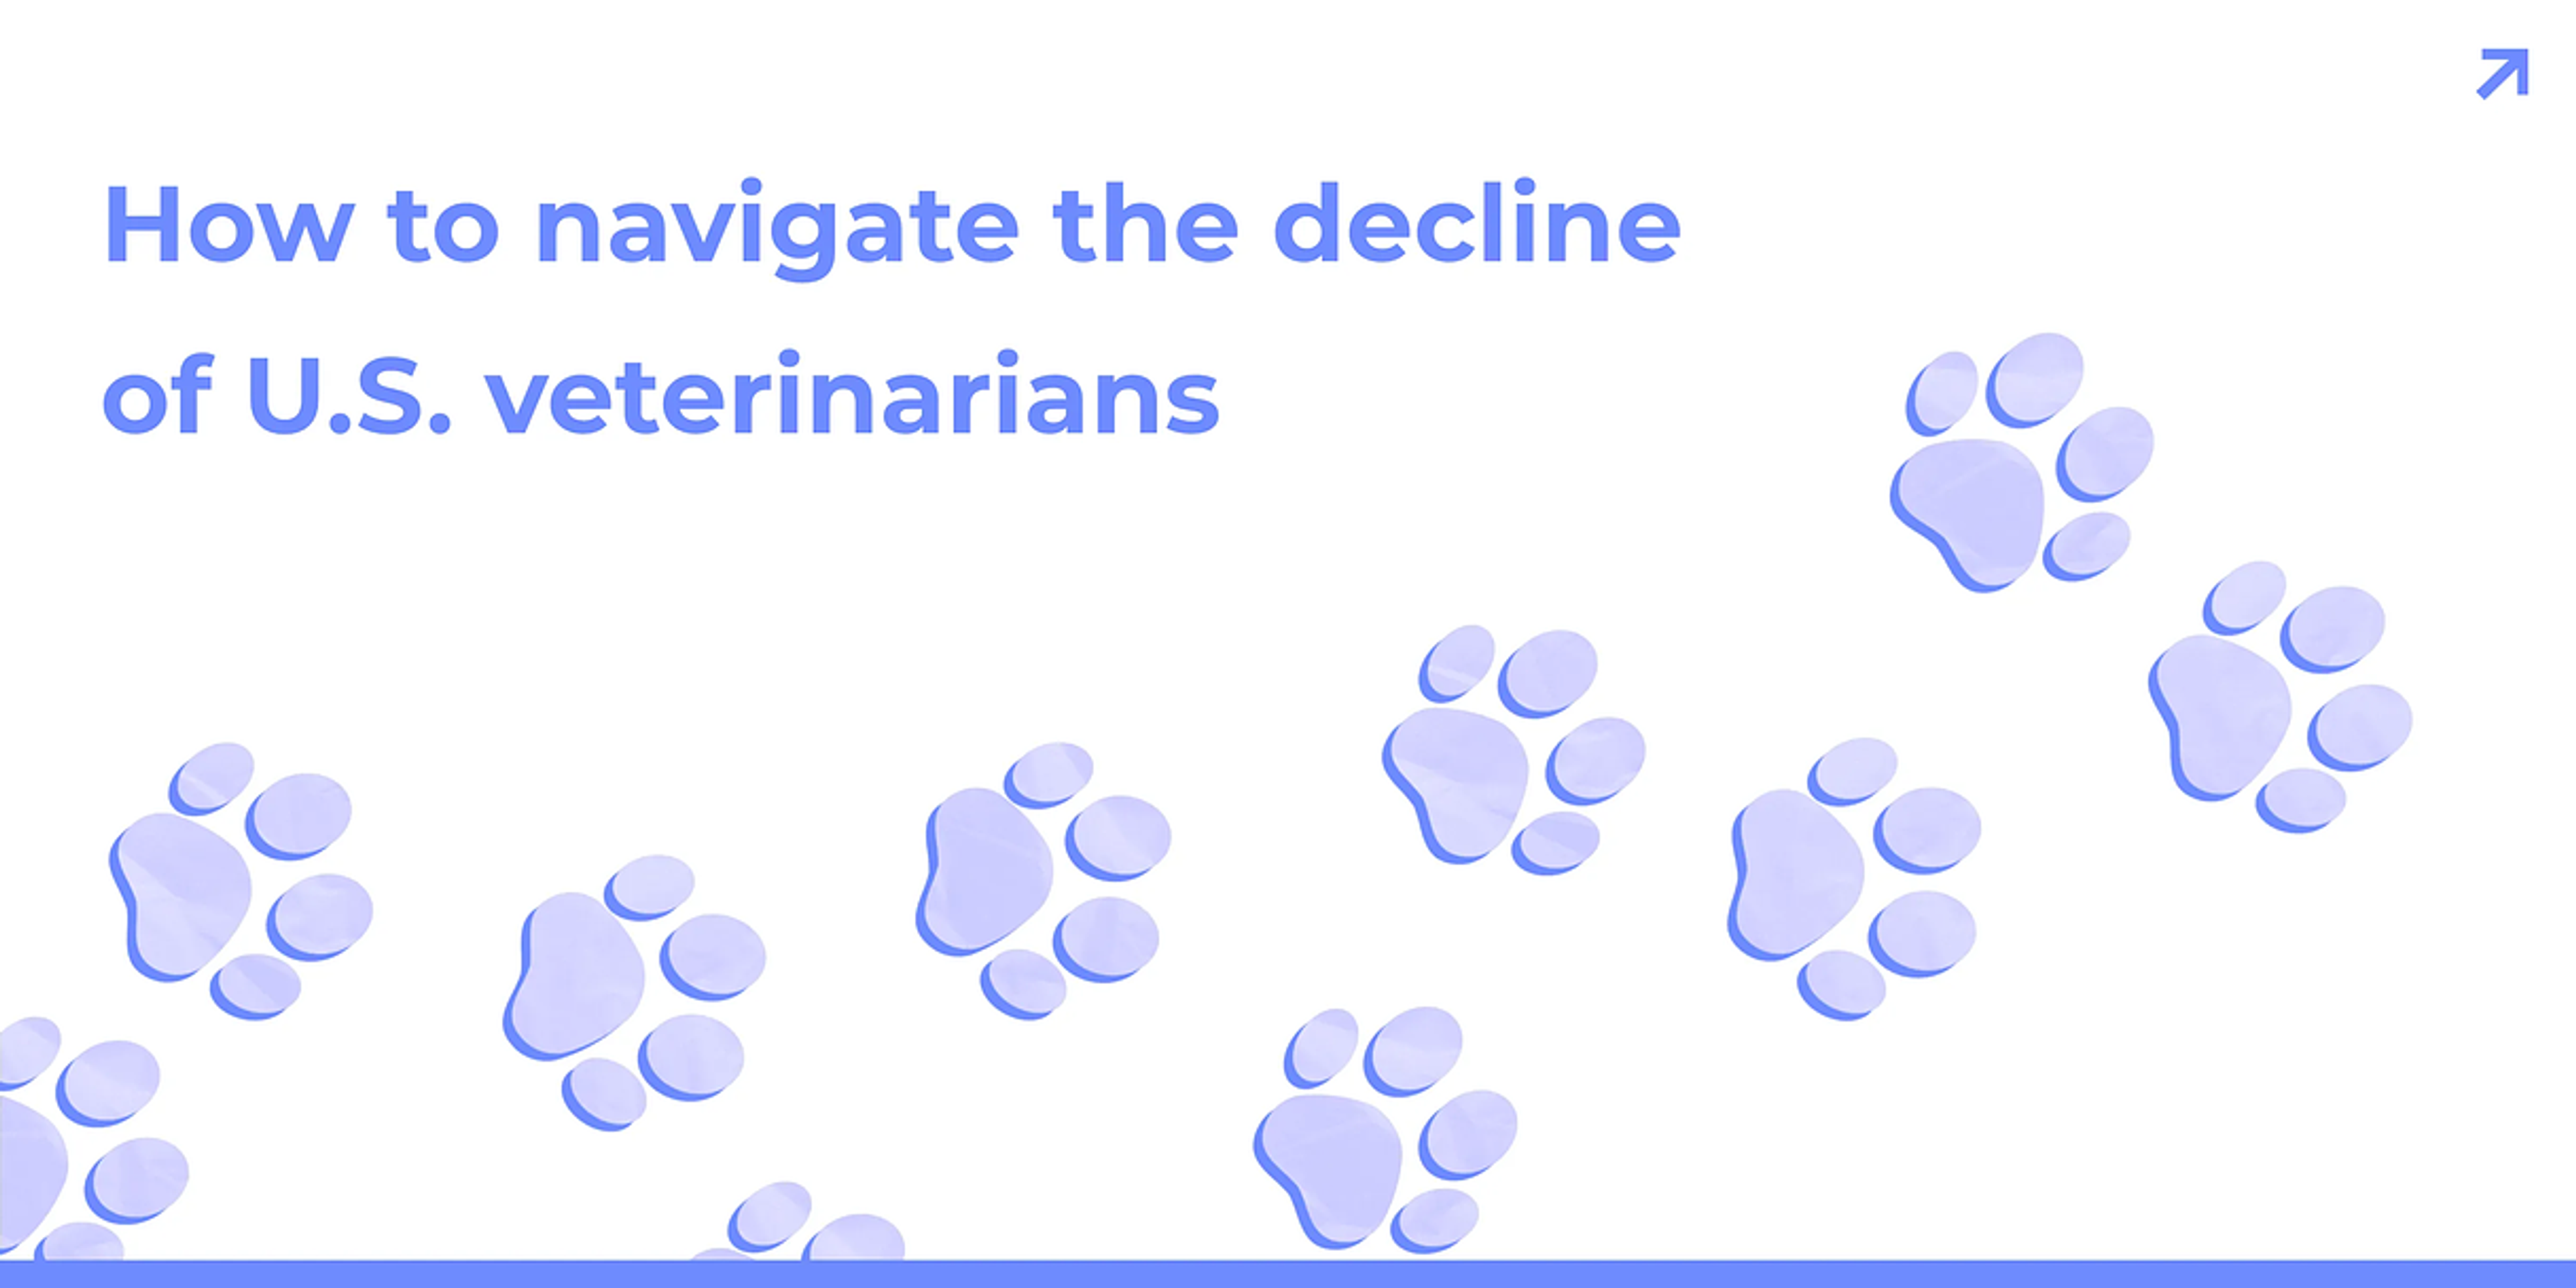 Image for How to navigate the decline of U.S. veterinarians